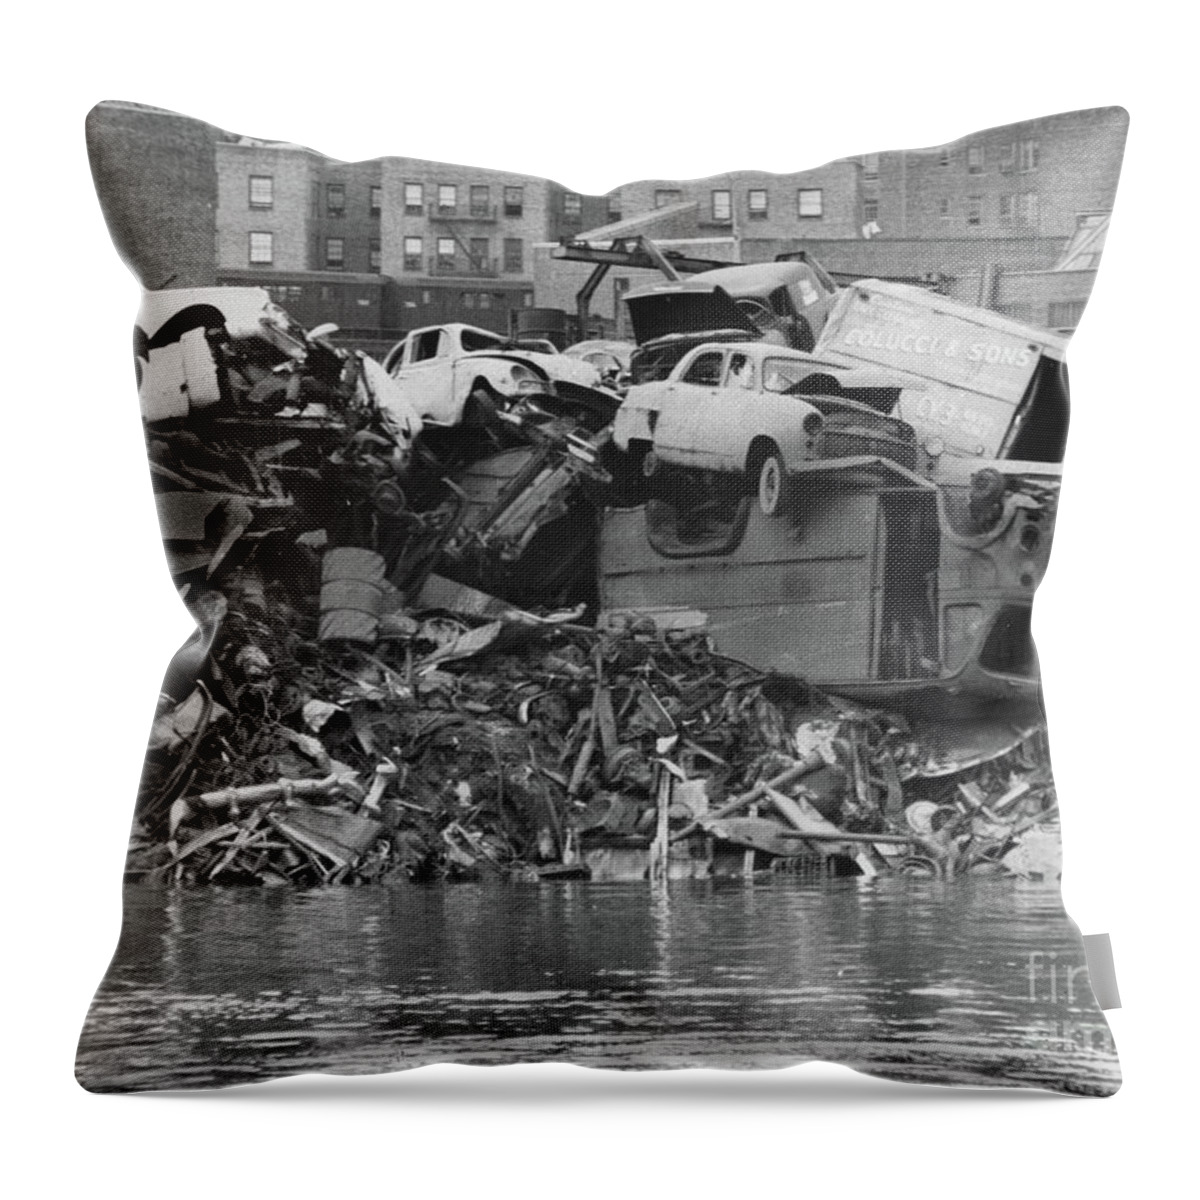 1967 Throw Pillow featuring the photograph Harlem River Junkyard, 1967 by Cole Thompson